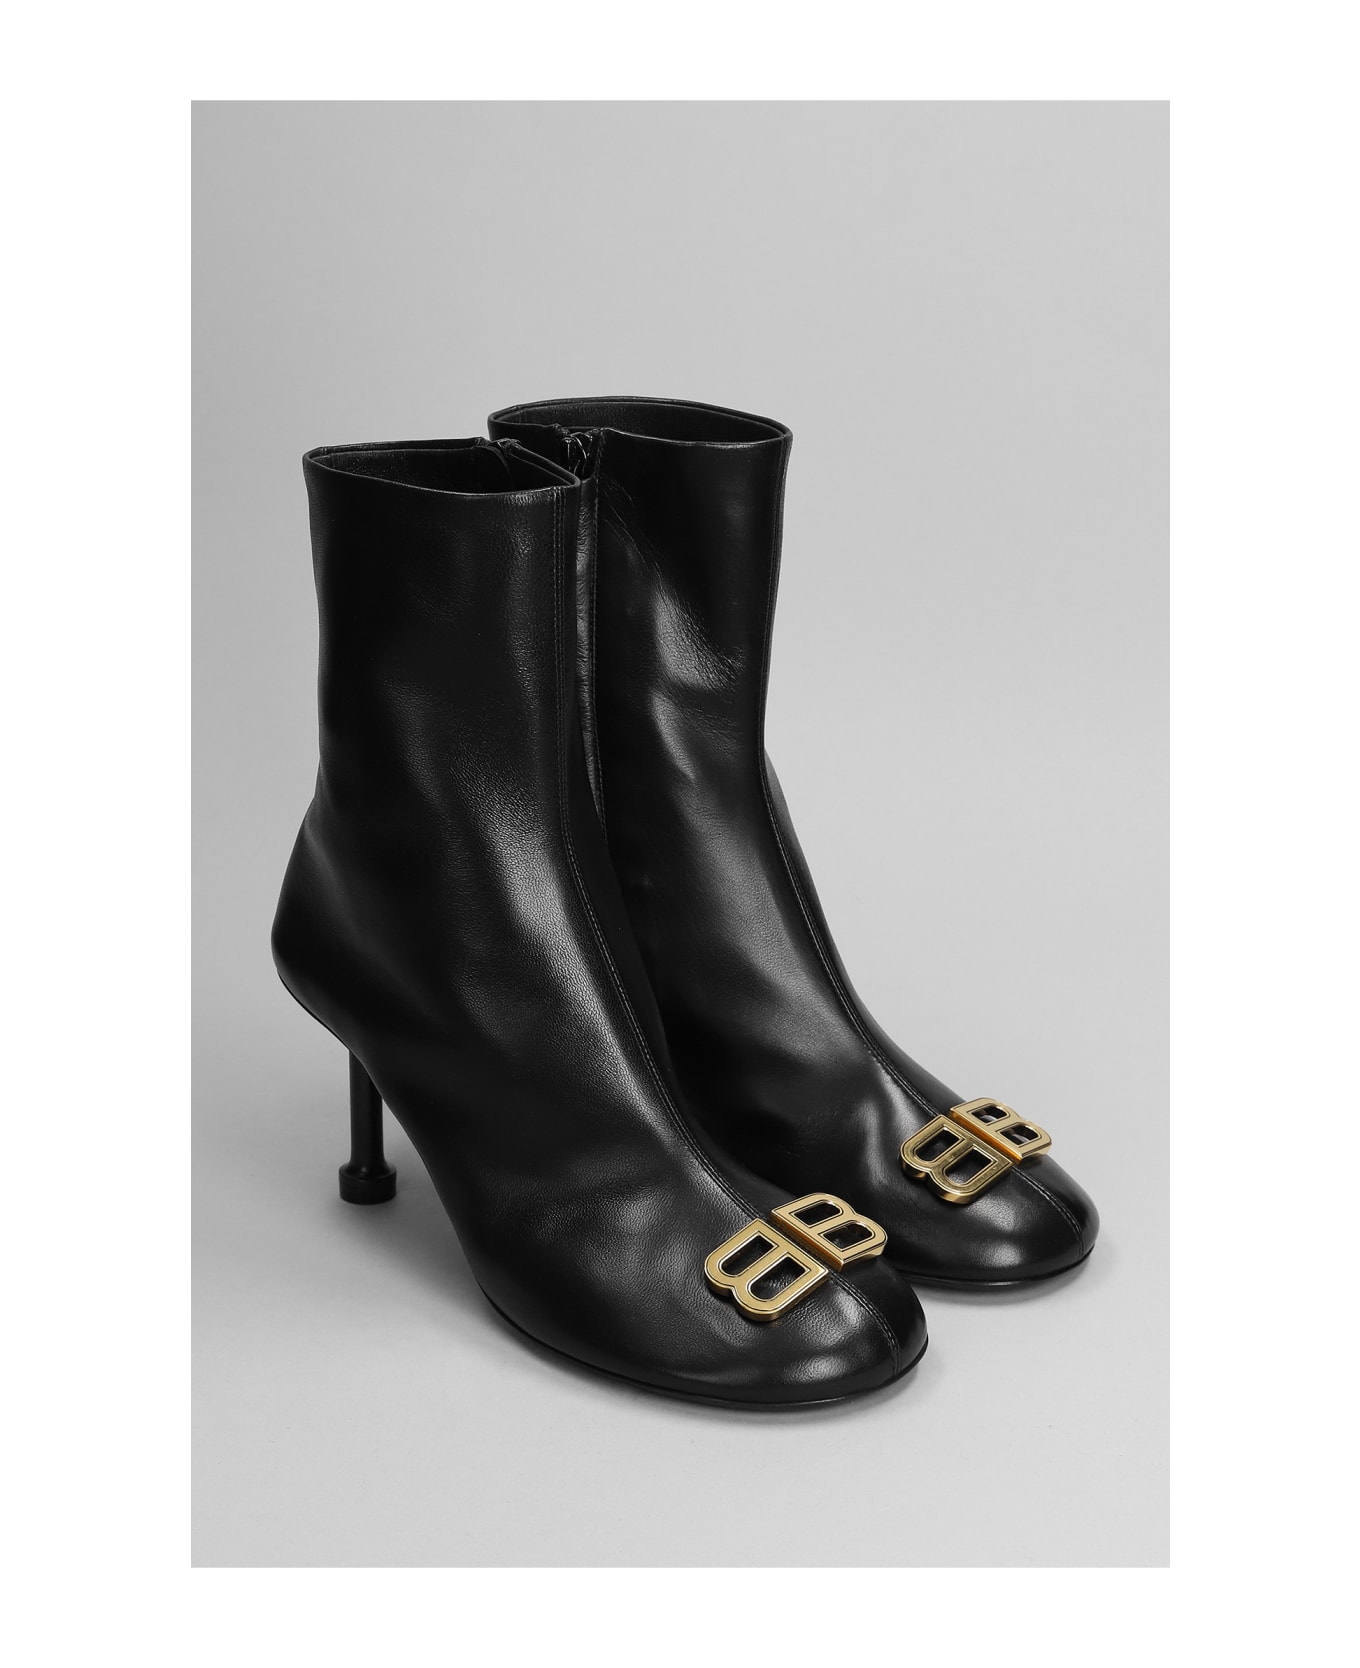 Balenciaga High Heels Ankle Boots In Black Leather - black ブーツ